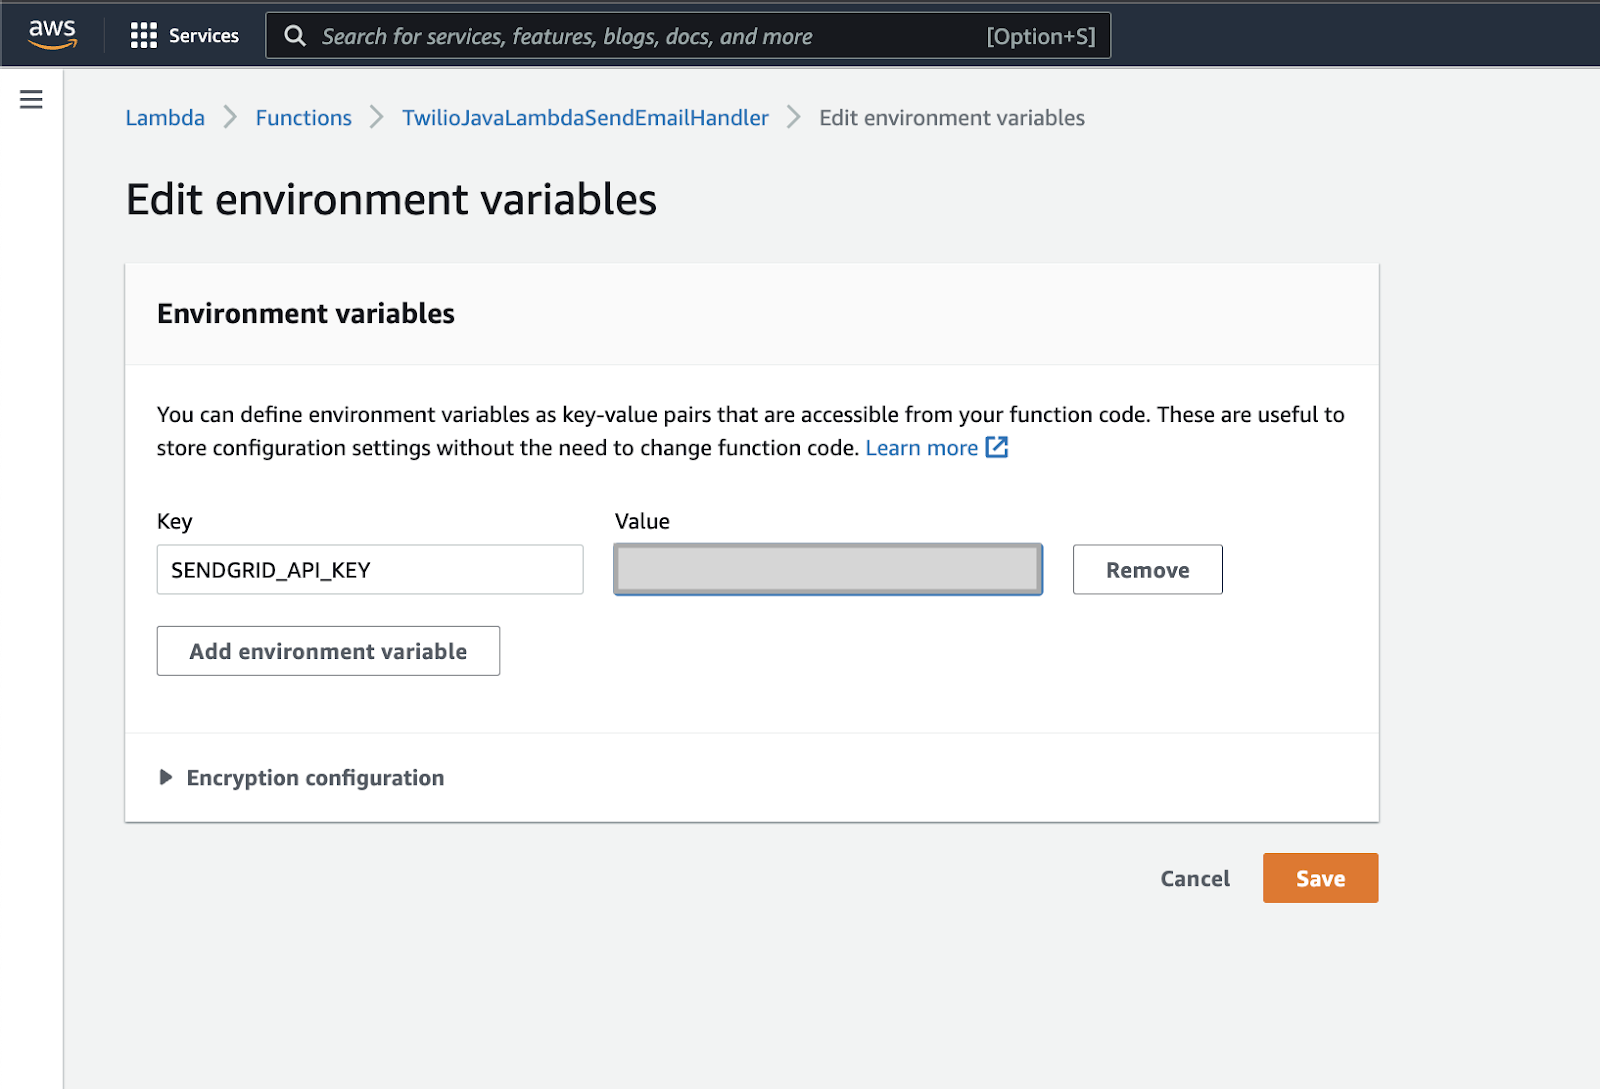 Add environment variables to the AWS Lambda function